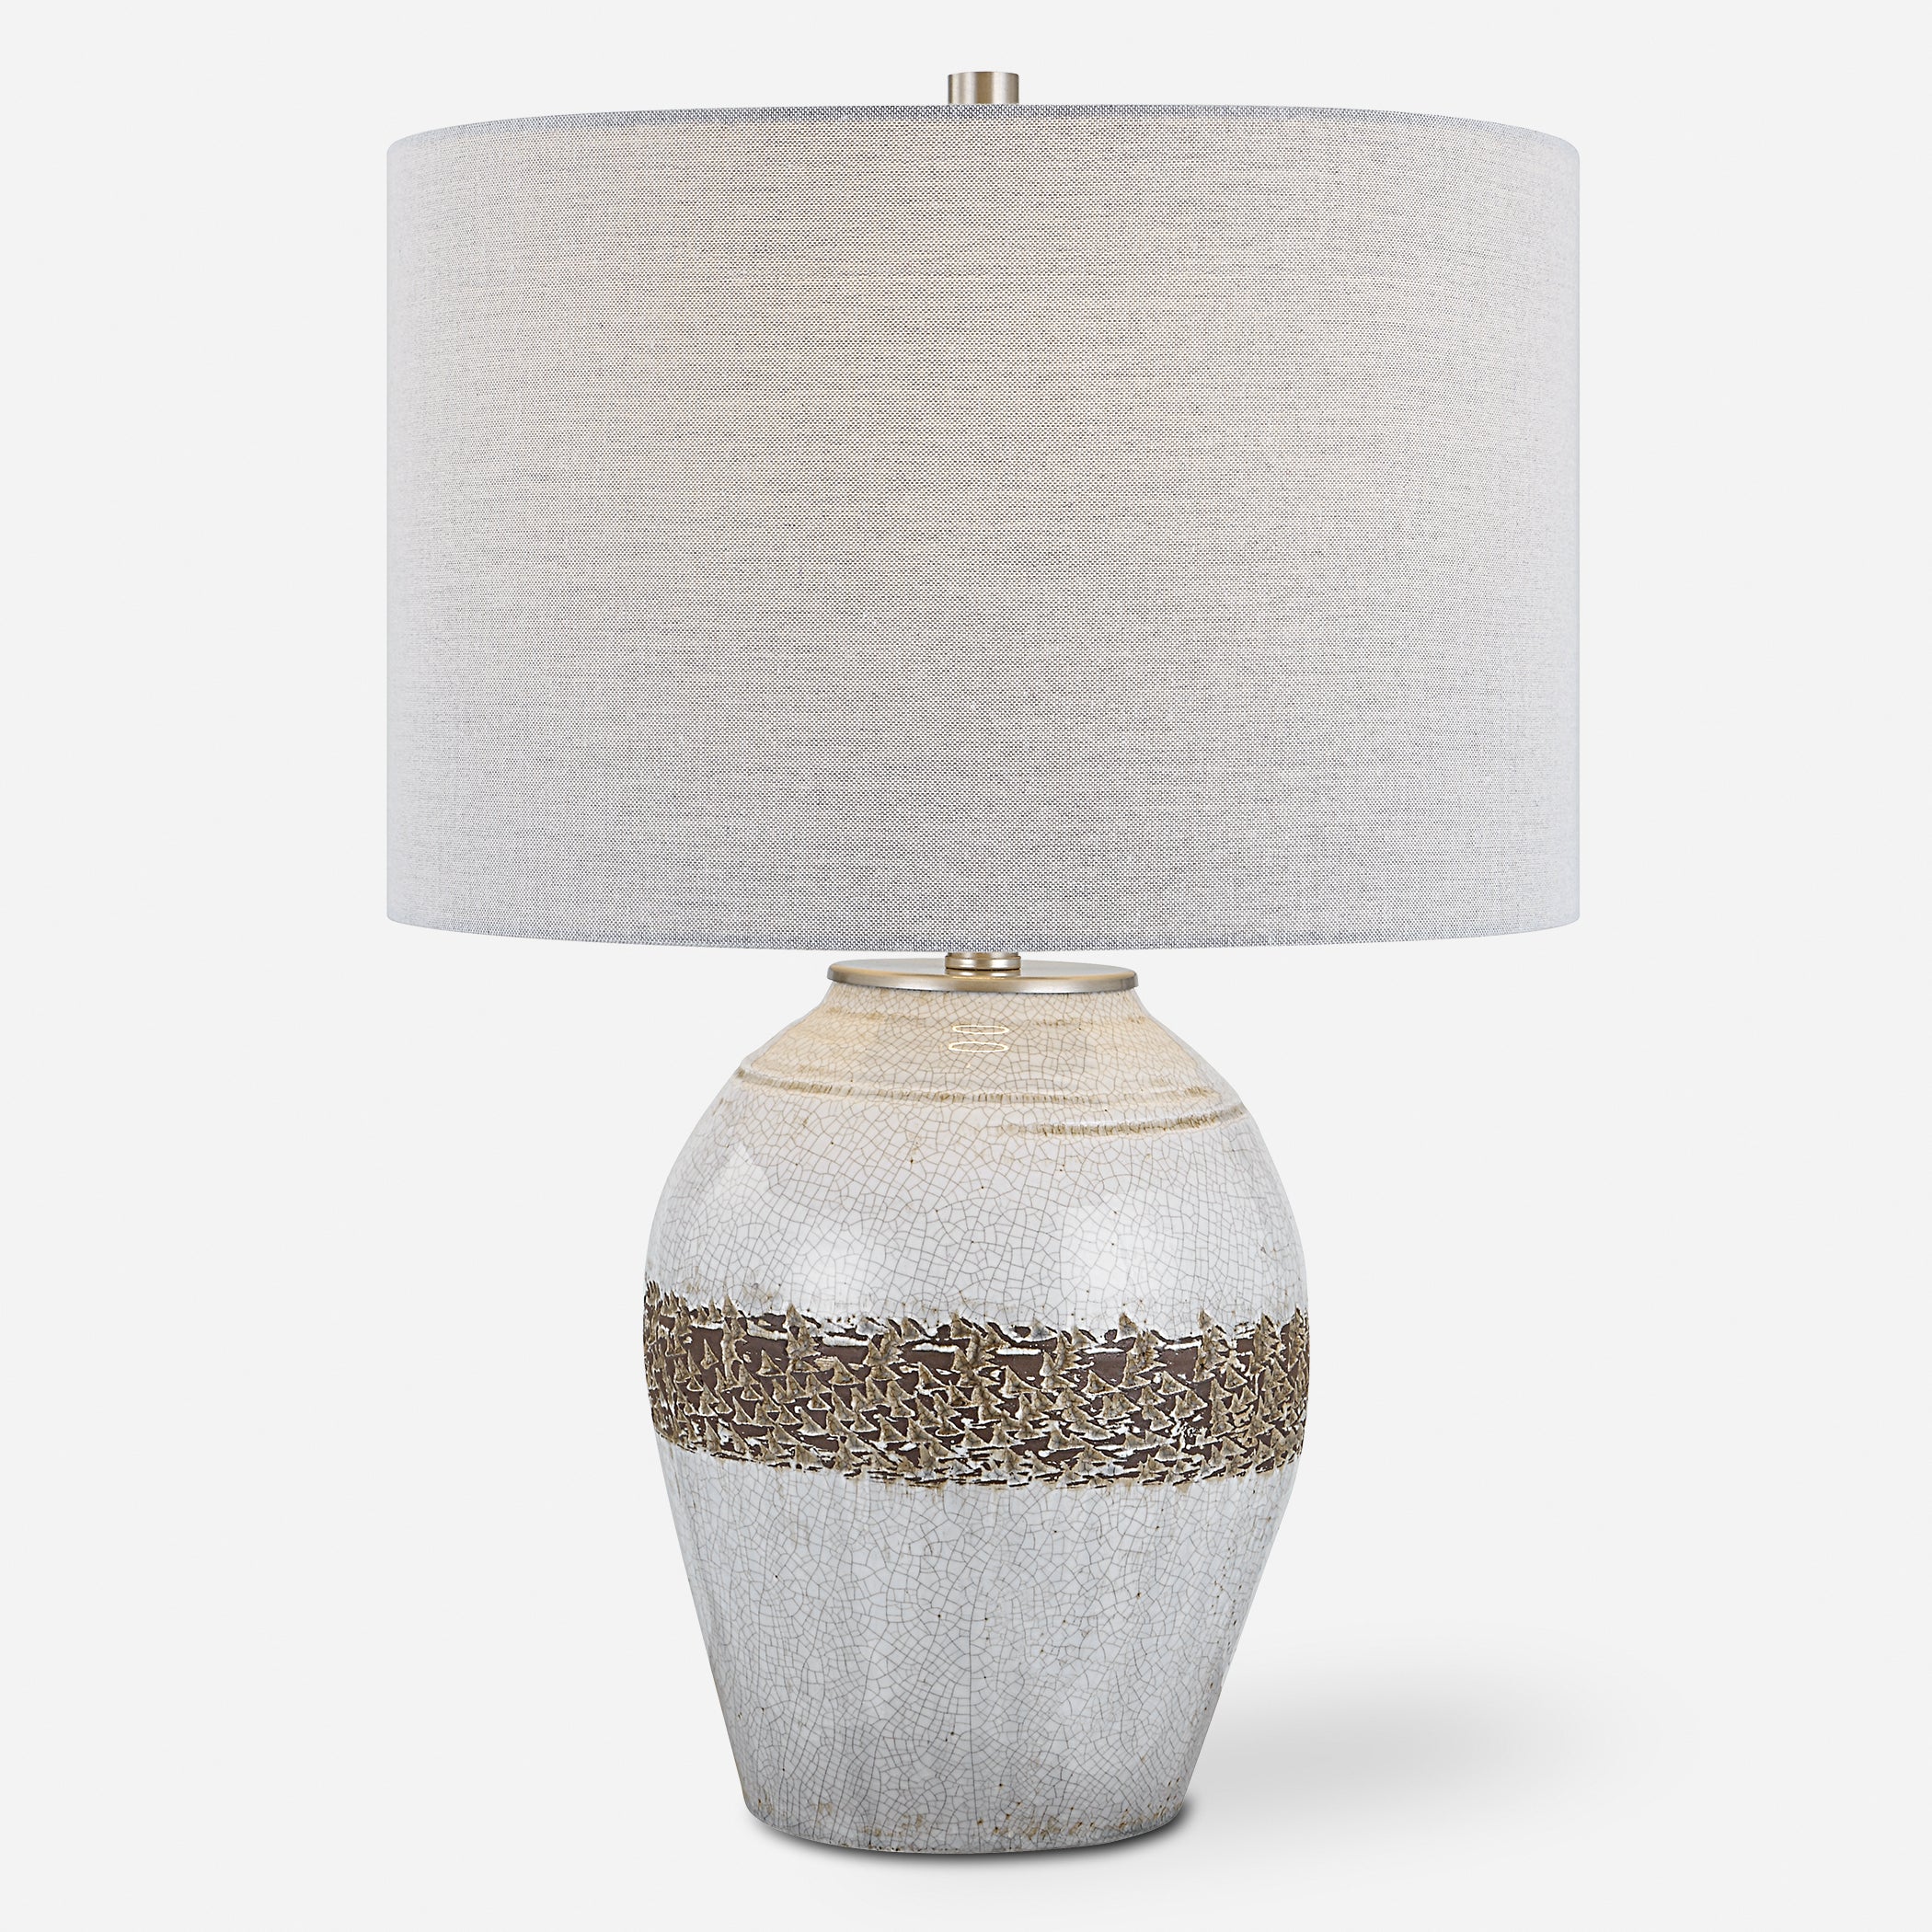 Uttermost Poul Crackled Table Lamp Crackled Table Lamp Uttermost   